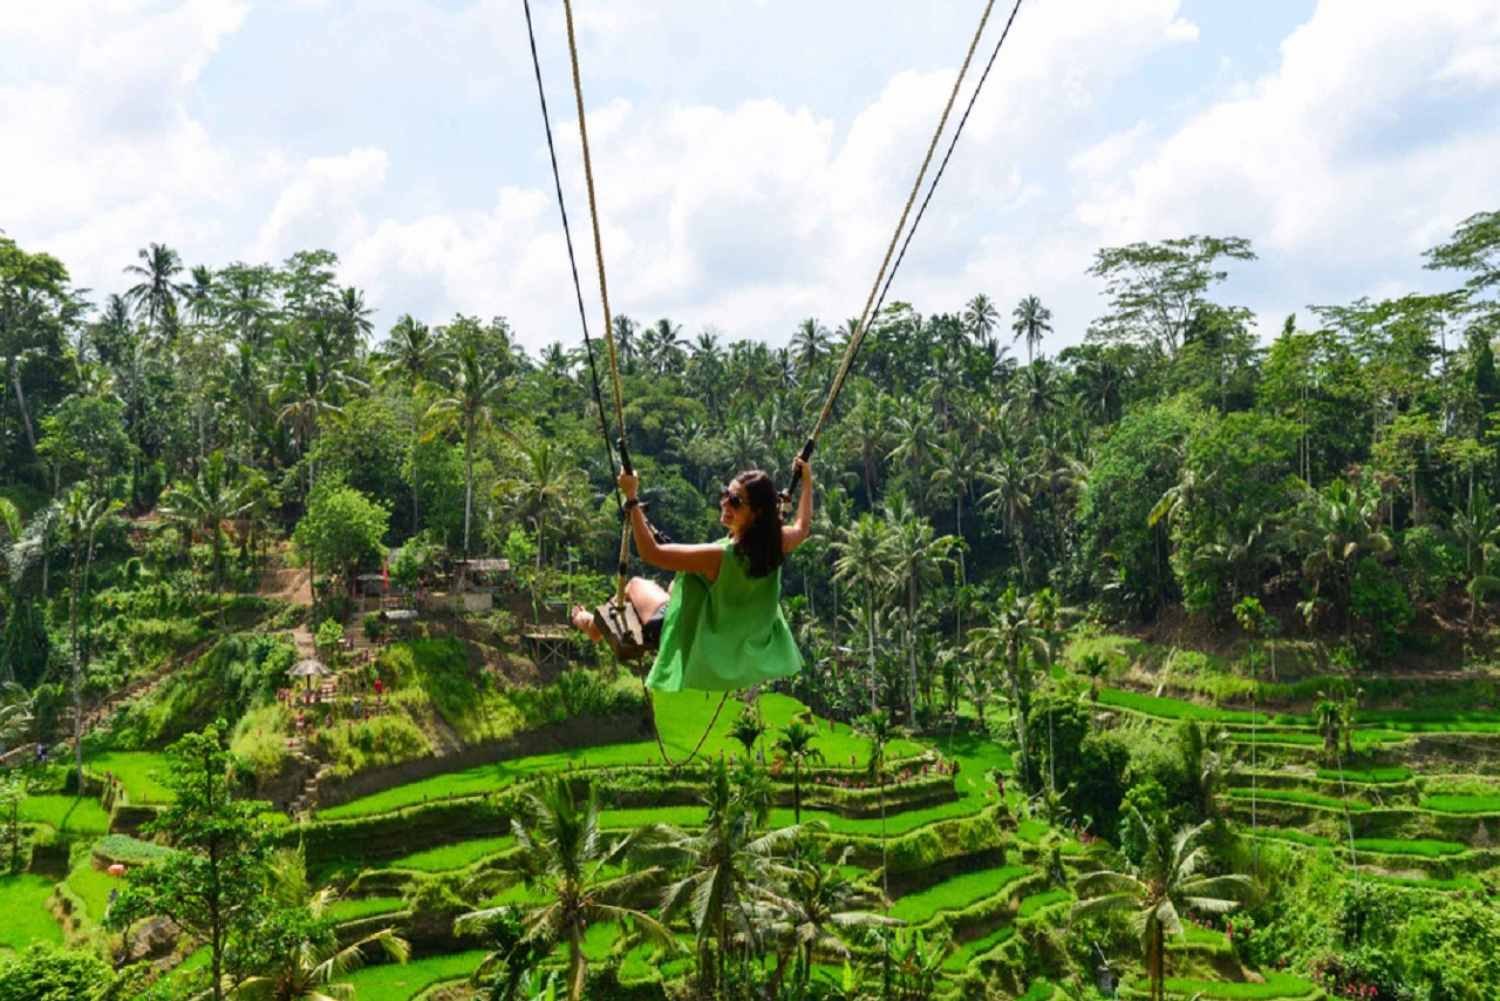 Bali: Ubud Full-Day Sightseeing Tour with Legong Dance Show